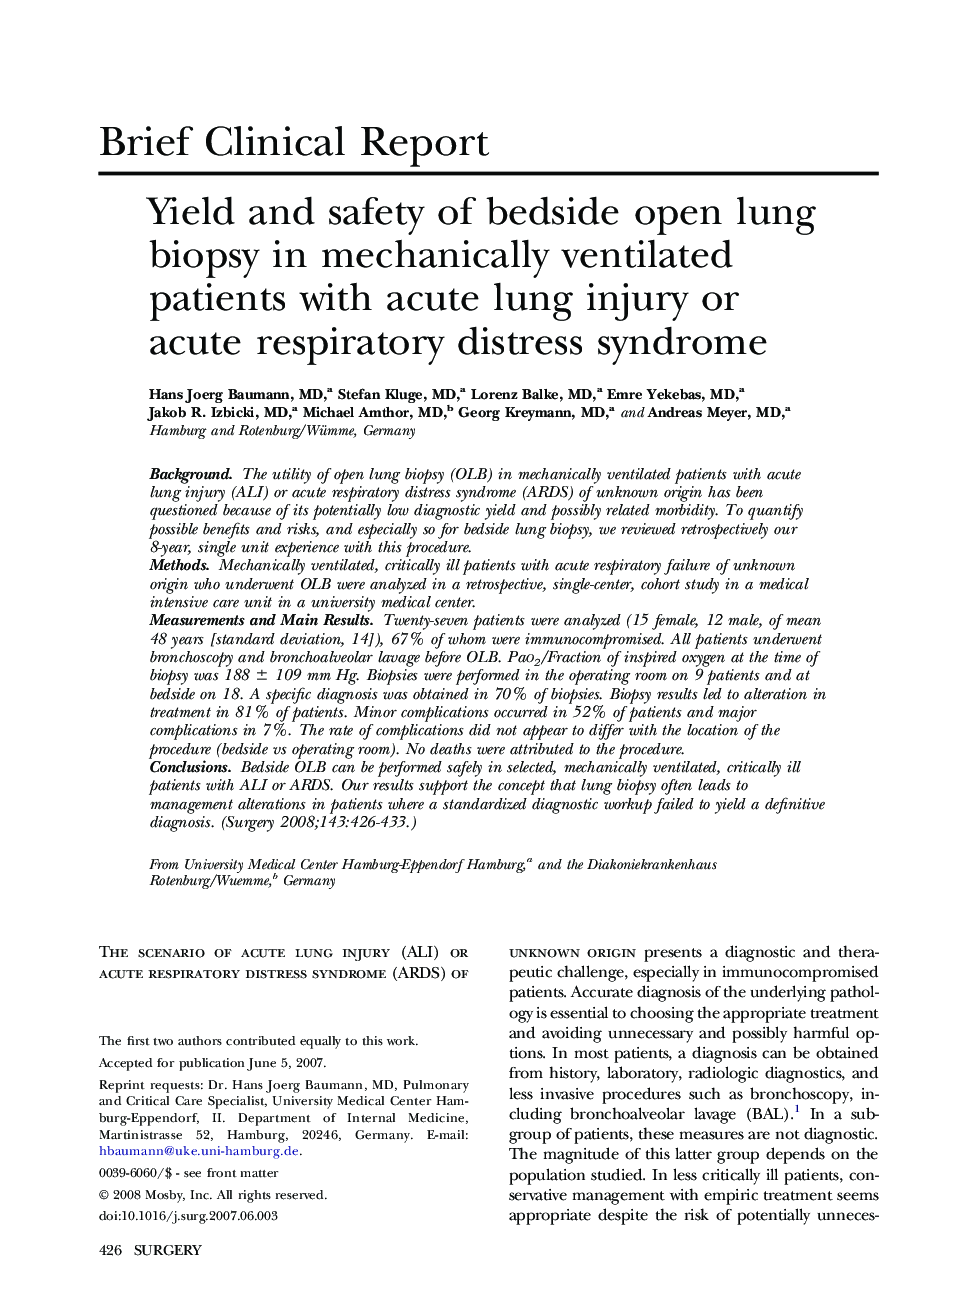 Yield and safety of bedside open lung biopsy in mechanically ventilated patients with acute lung injury or acute respiratory distress syndrome